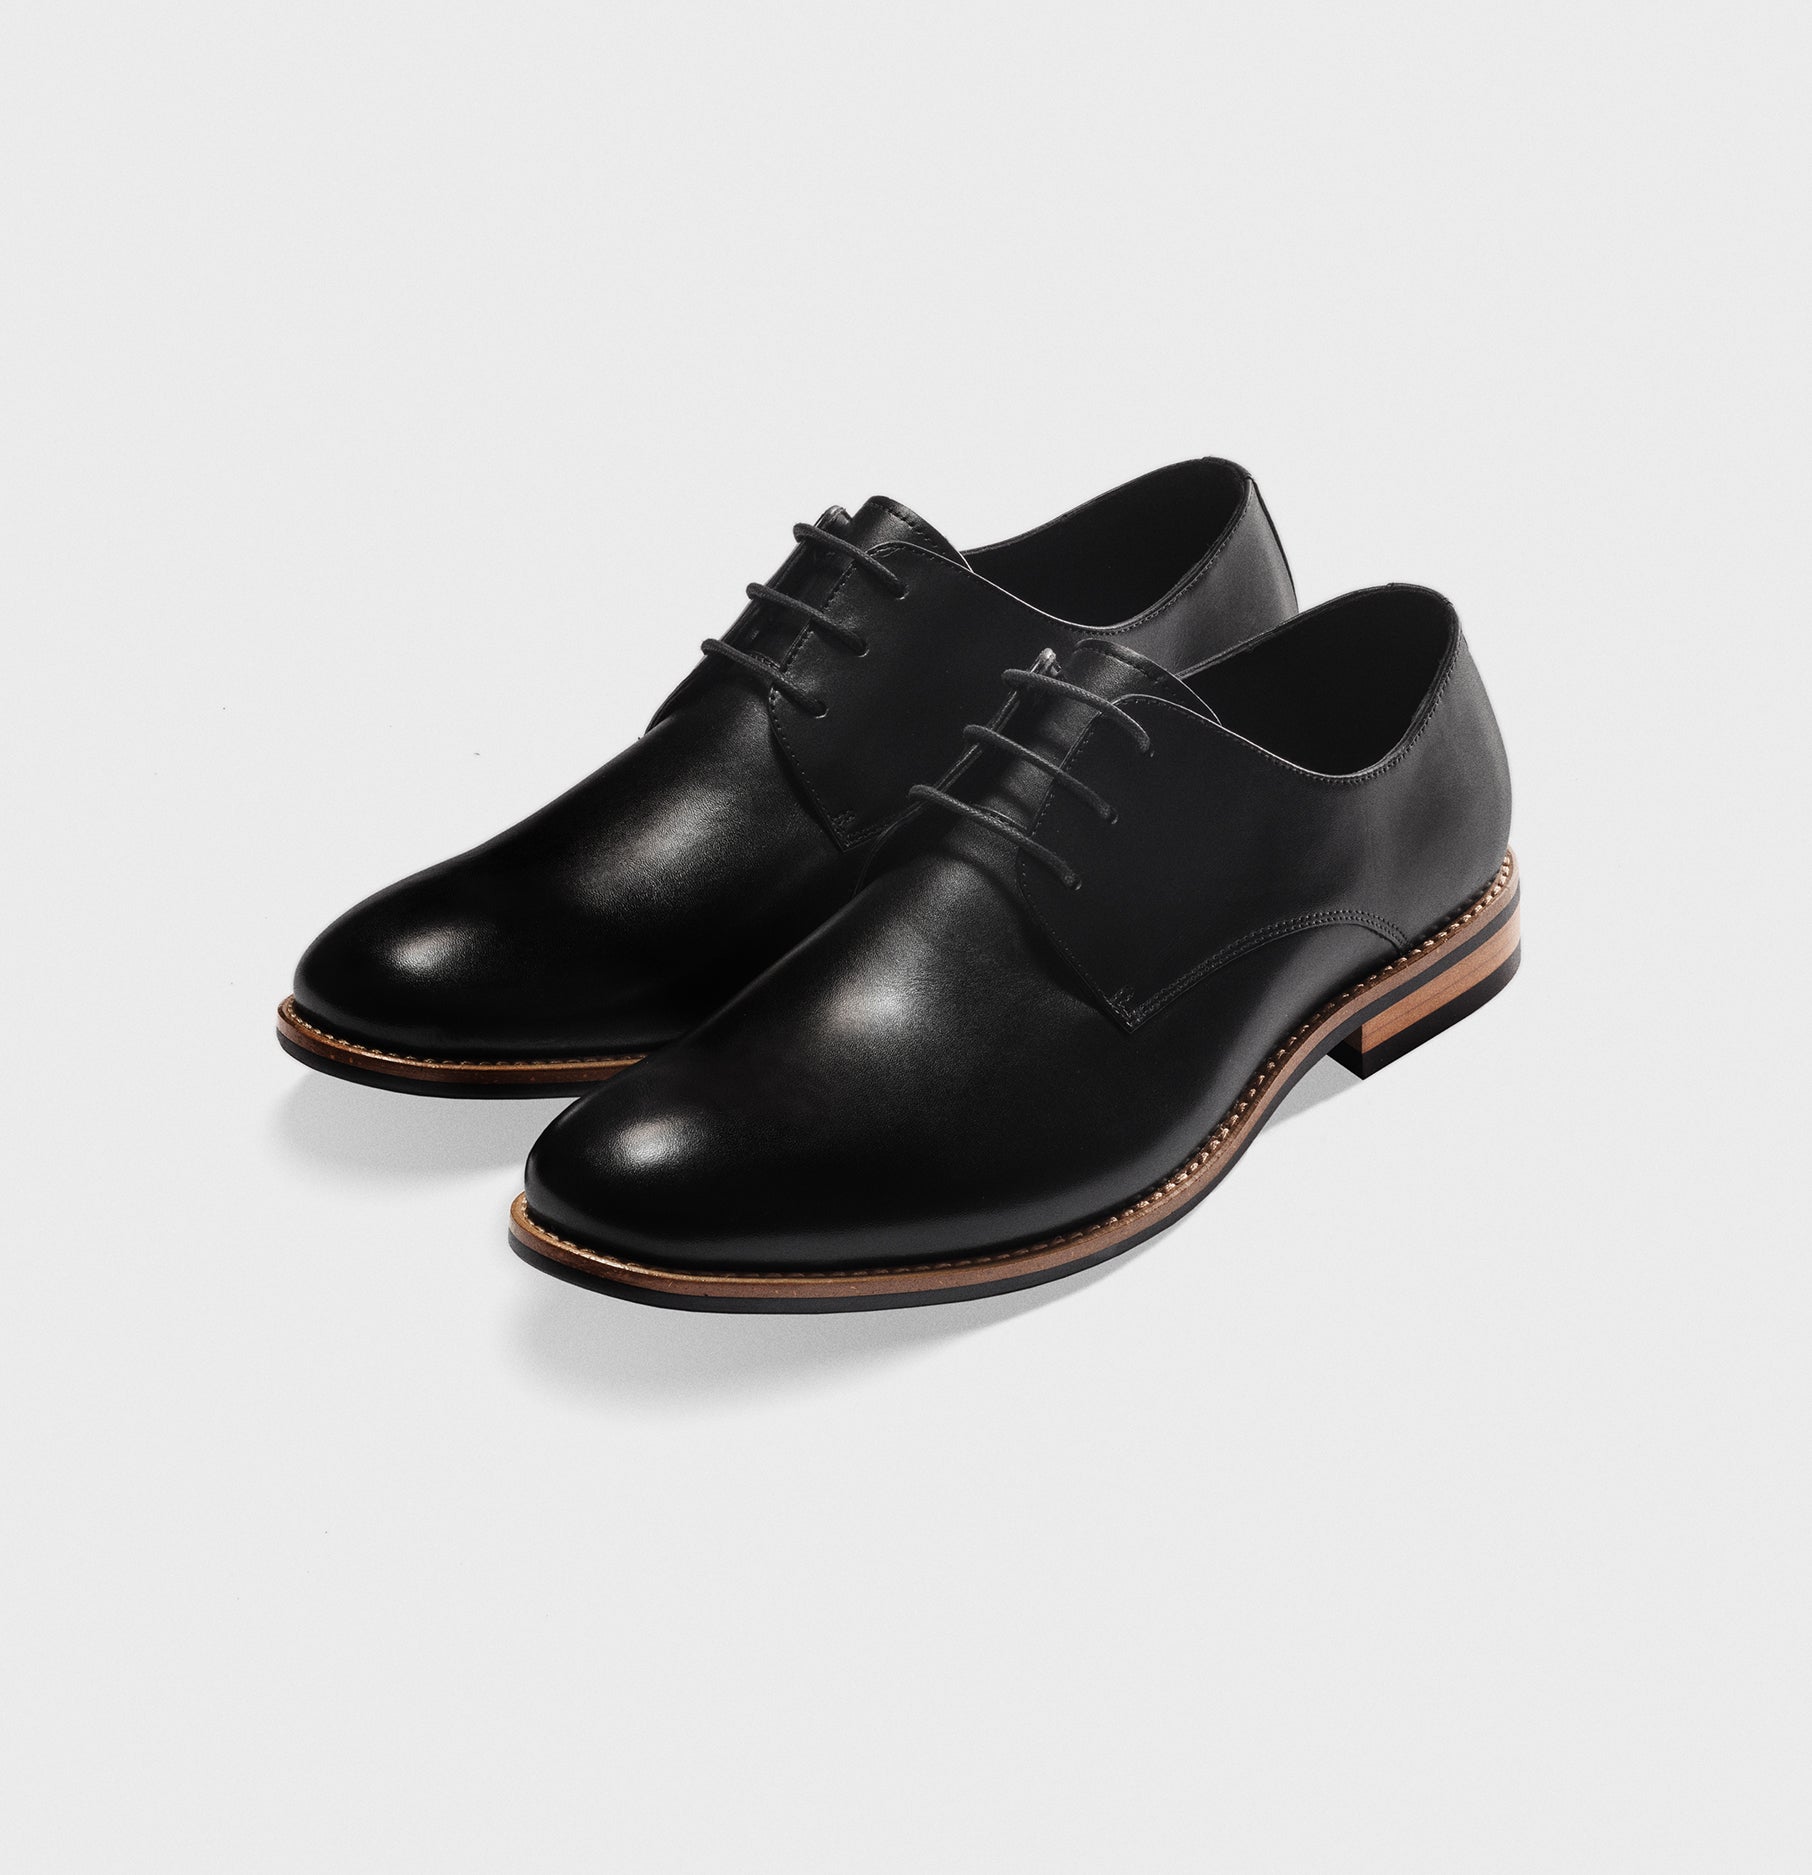 black dress shoes with white soles